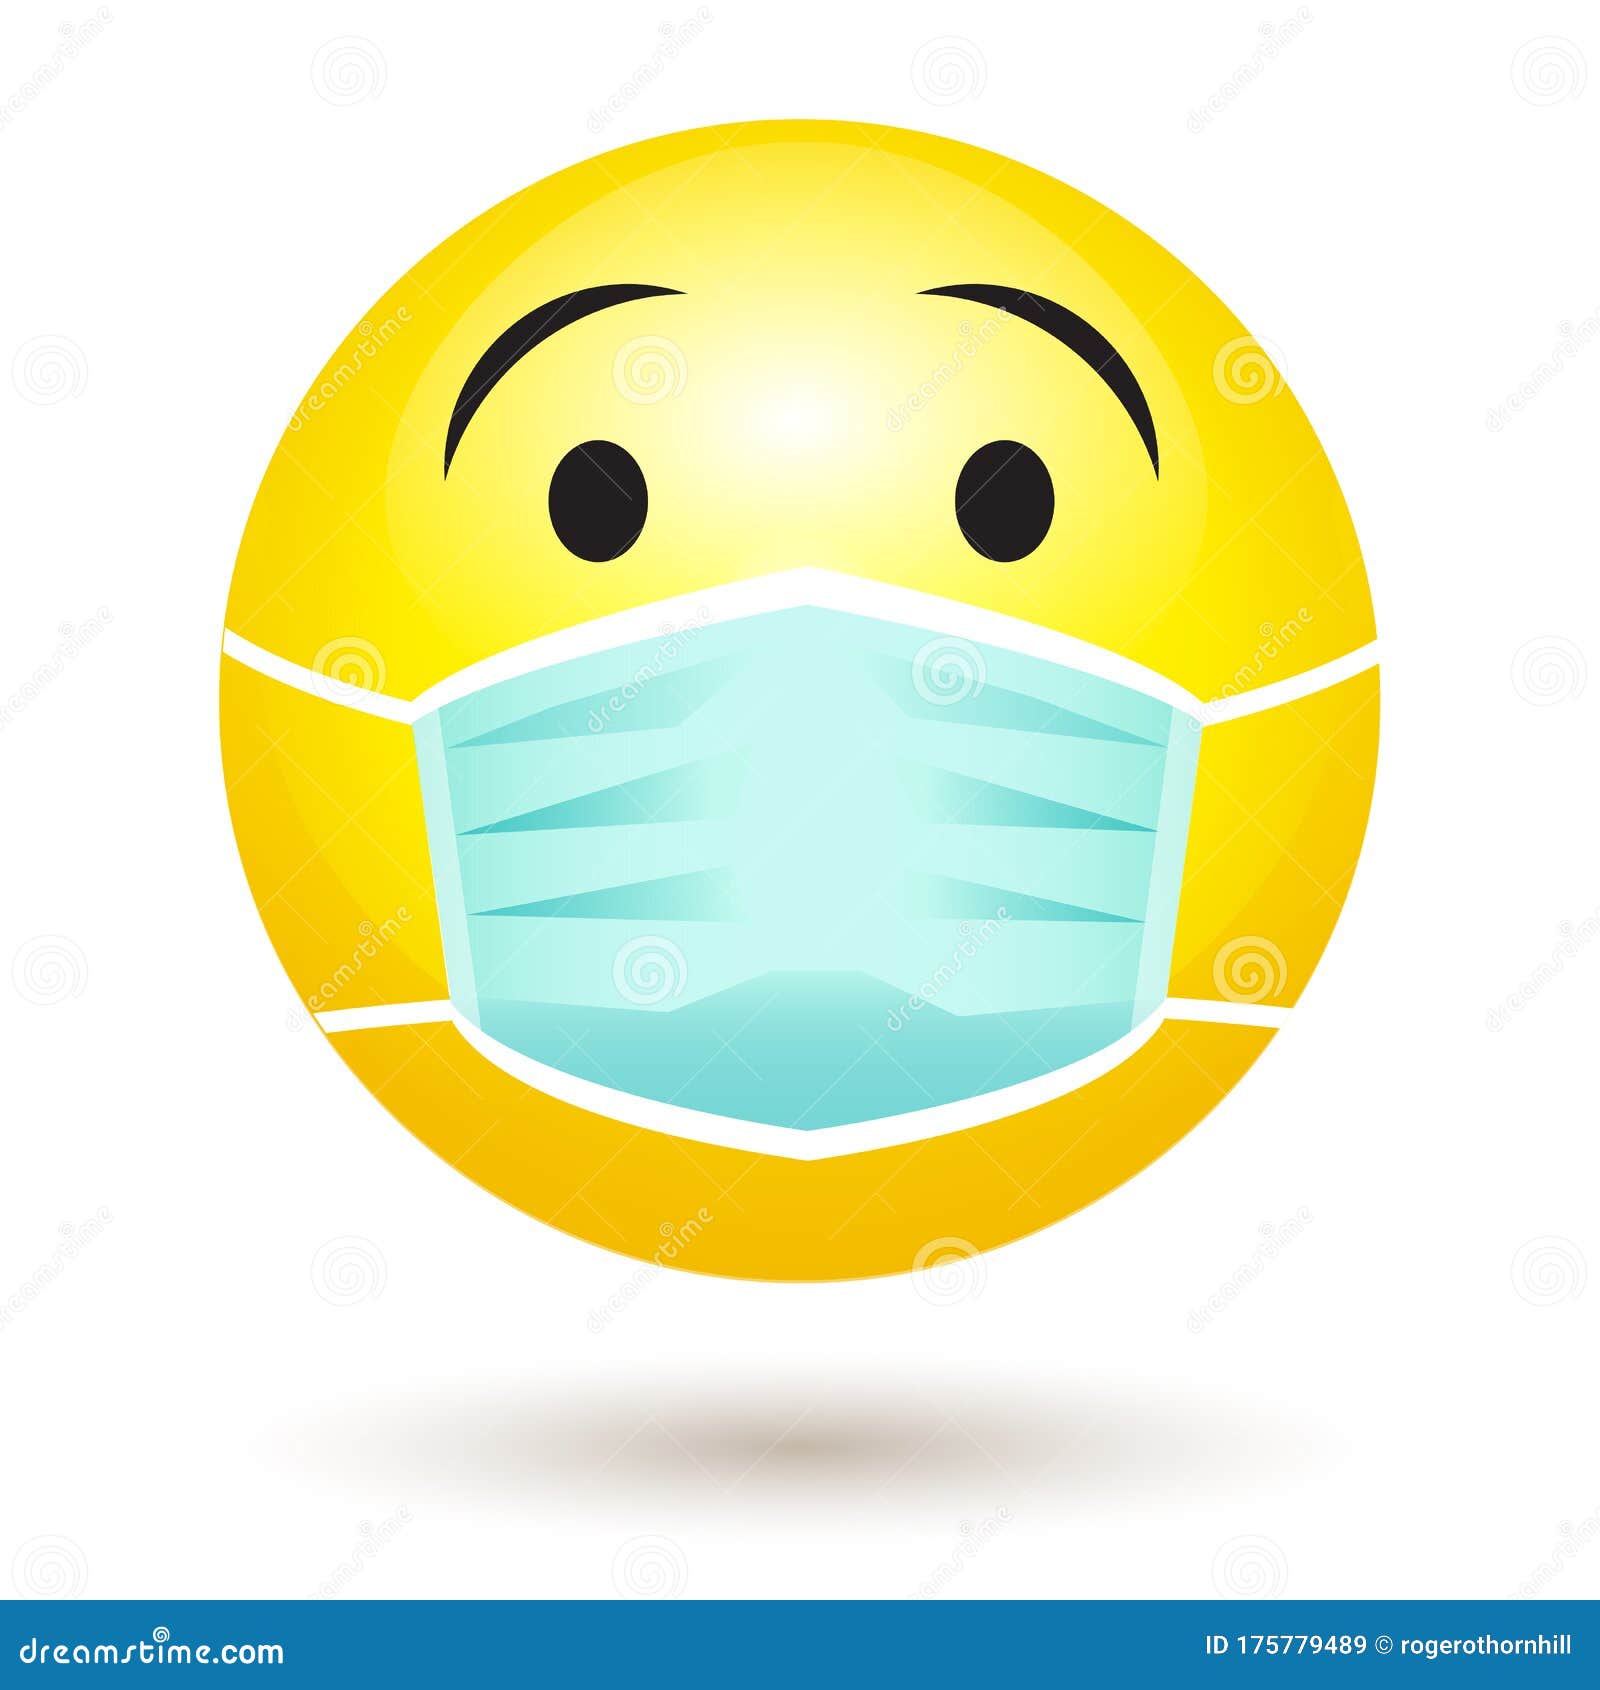 smile emoji wearing a protective surgical mask. icon for coronavirus outbreak.